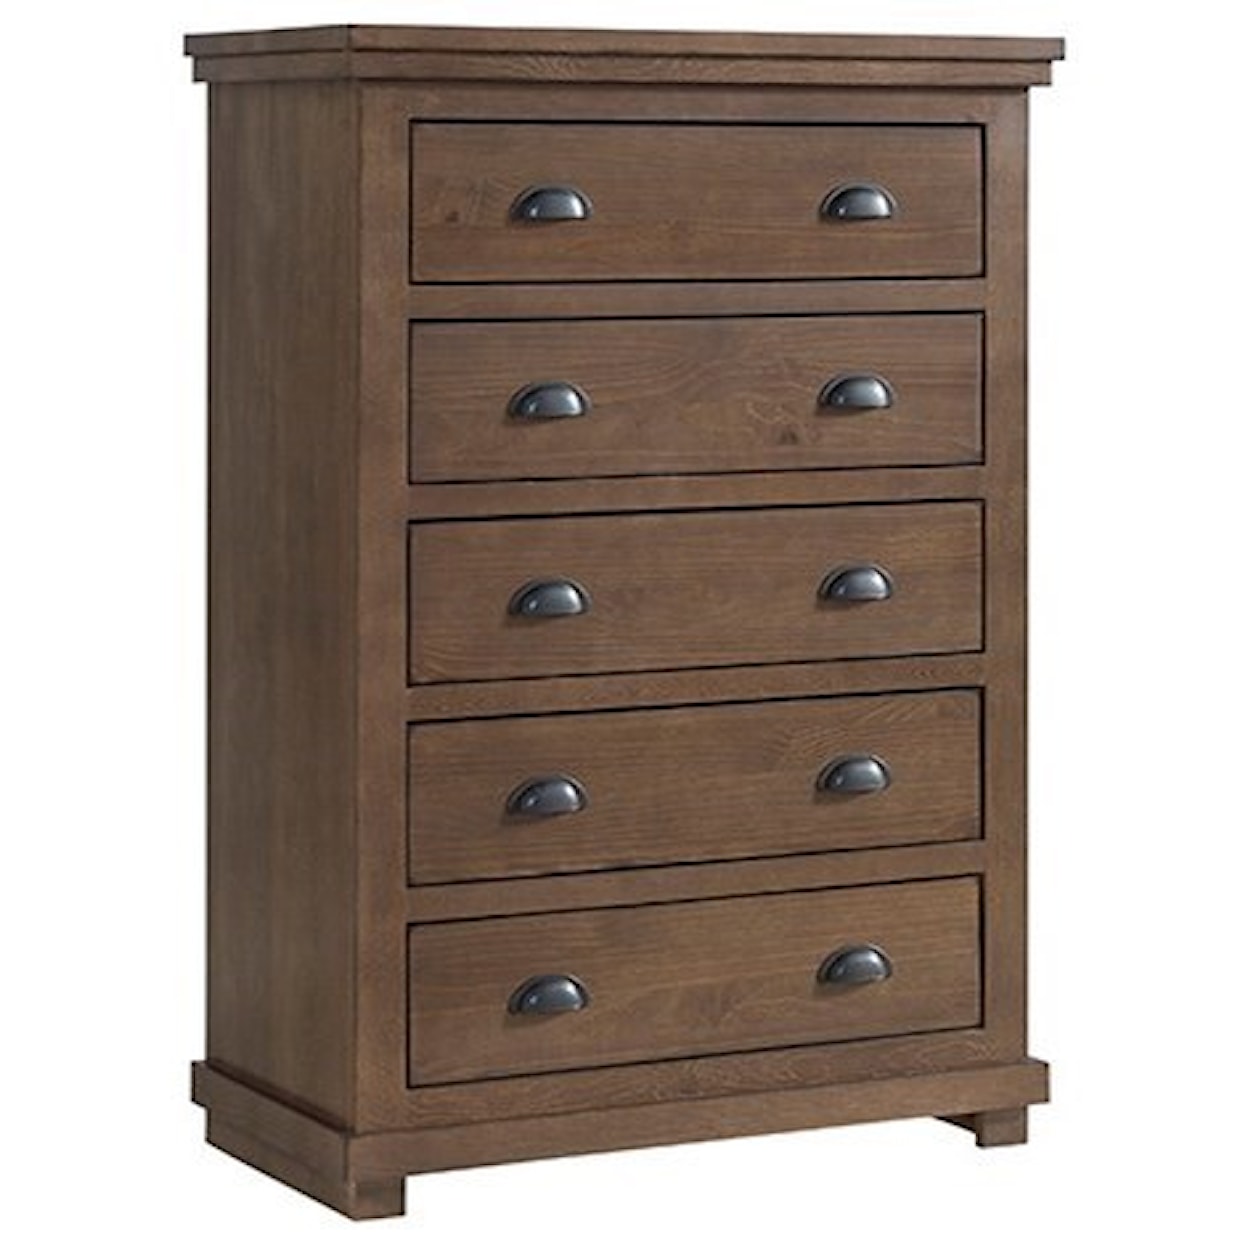 Carolina Chairs Memphis Chest of Drawers